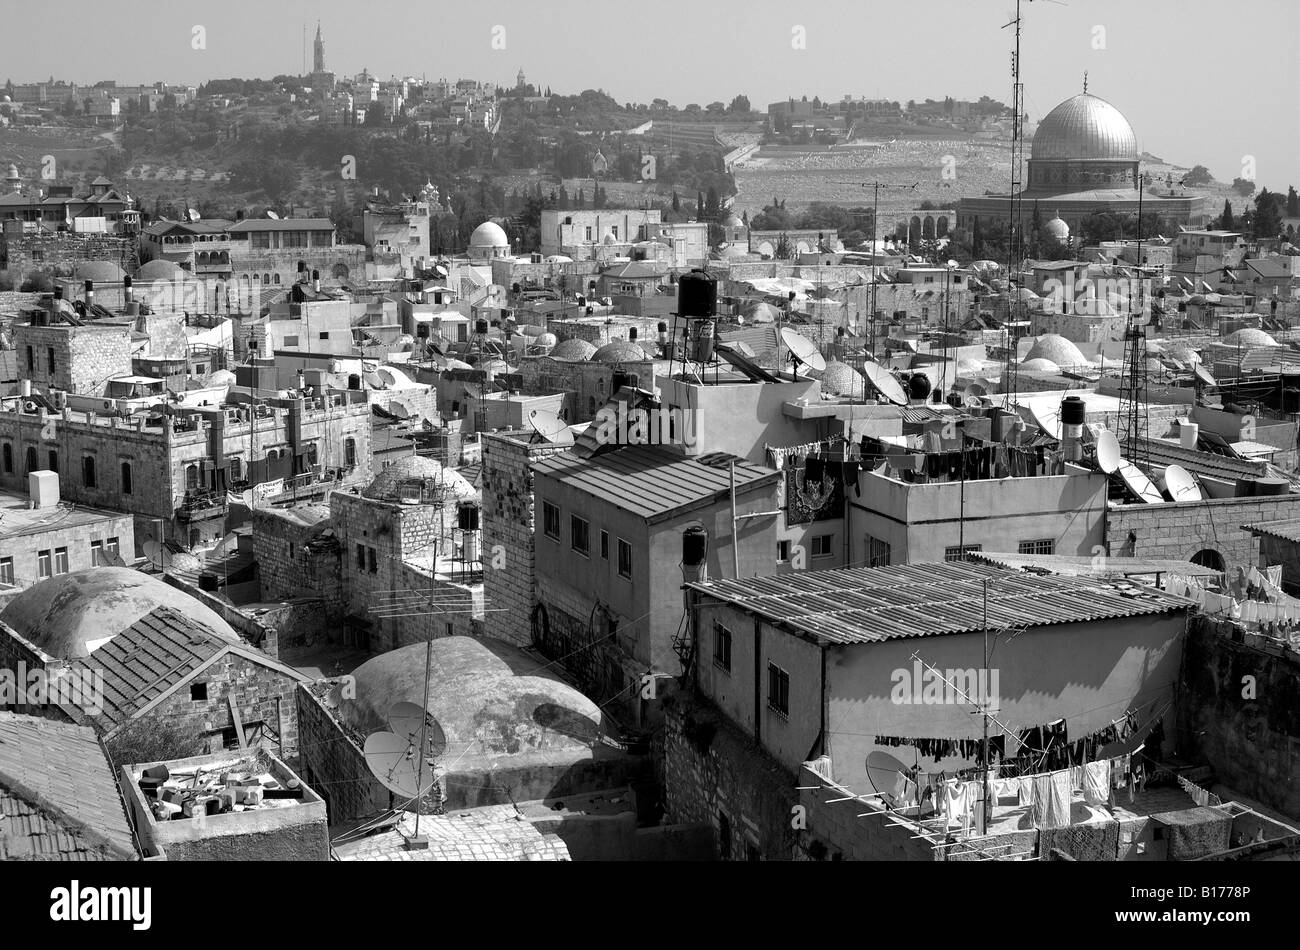 The Dome of the Rock stands above the cobbled alleyways of the Arab Quarter of the Old City of Jerusalem. Stock Photo